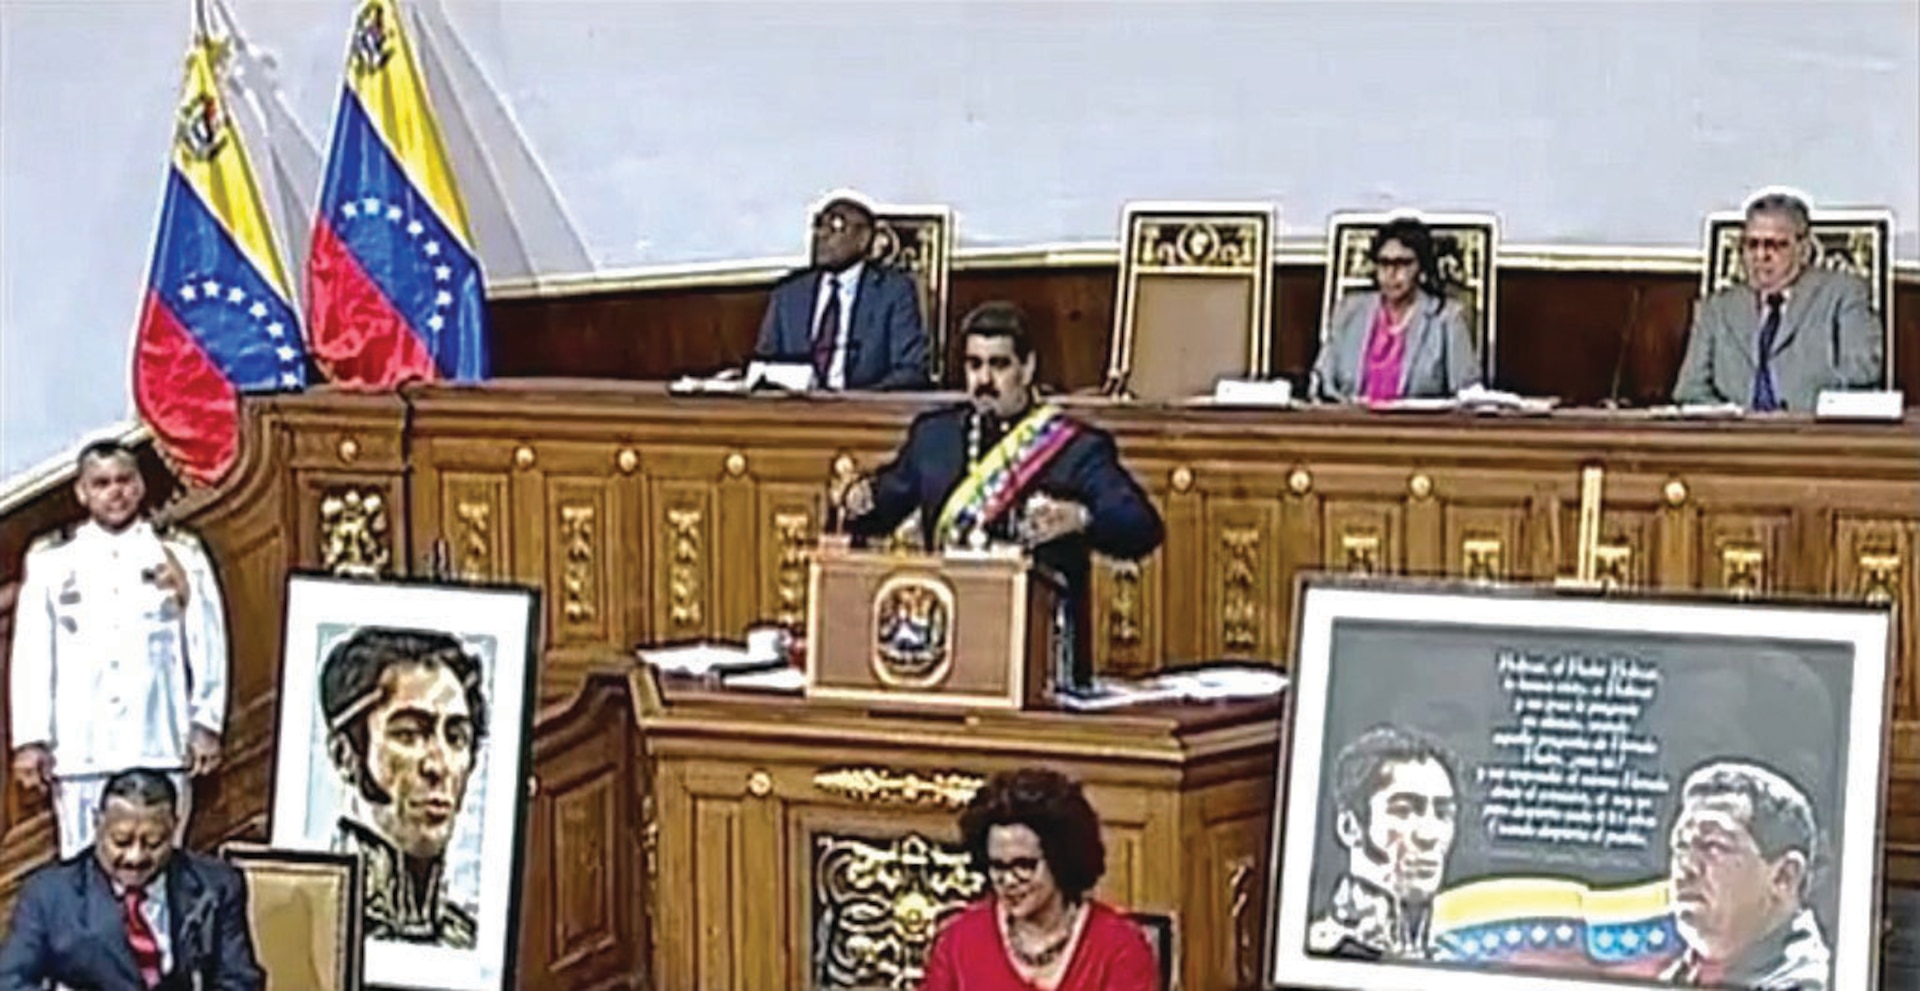 President Maduro speaking at a Venezuelan Constituent Assembly session on August 10, 2017. (Presidency Press)Licensed under Creative Commons Attribution-ShareAlike 3.0 Unported License. Photo produced unaltered.